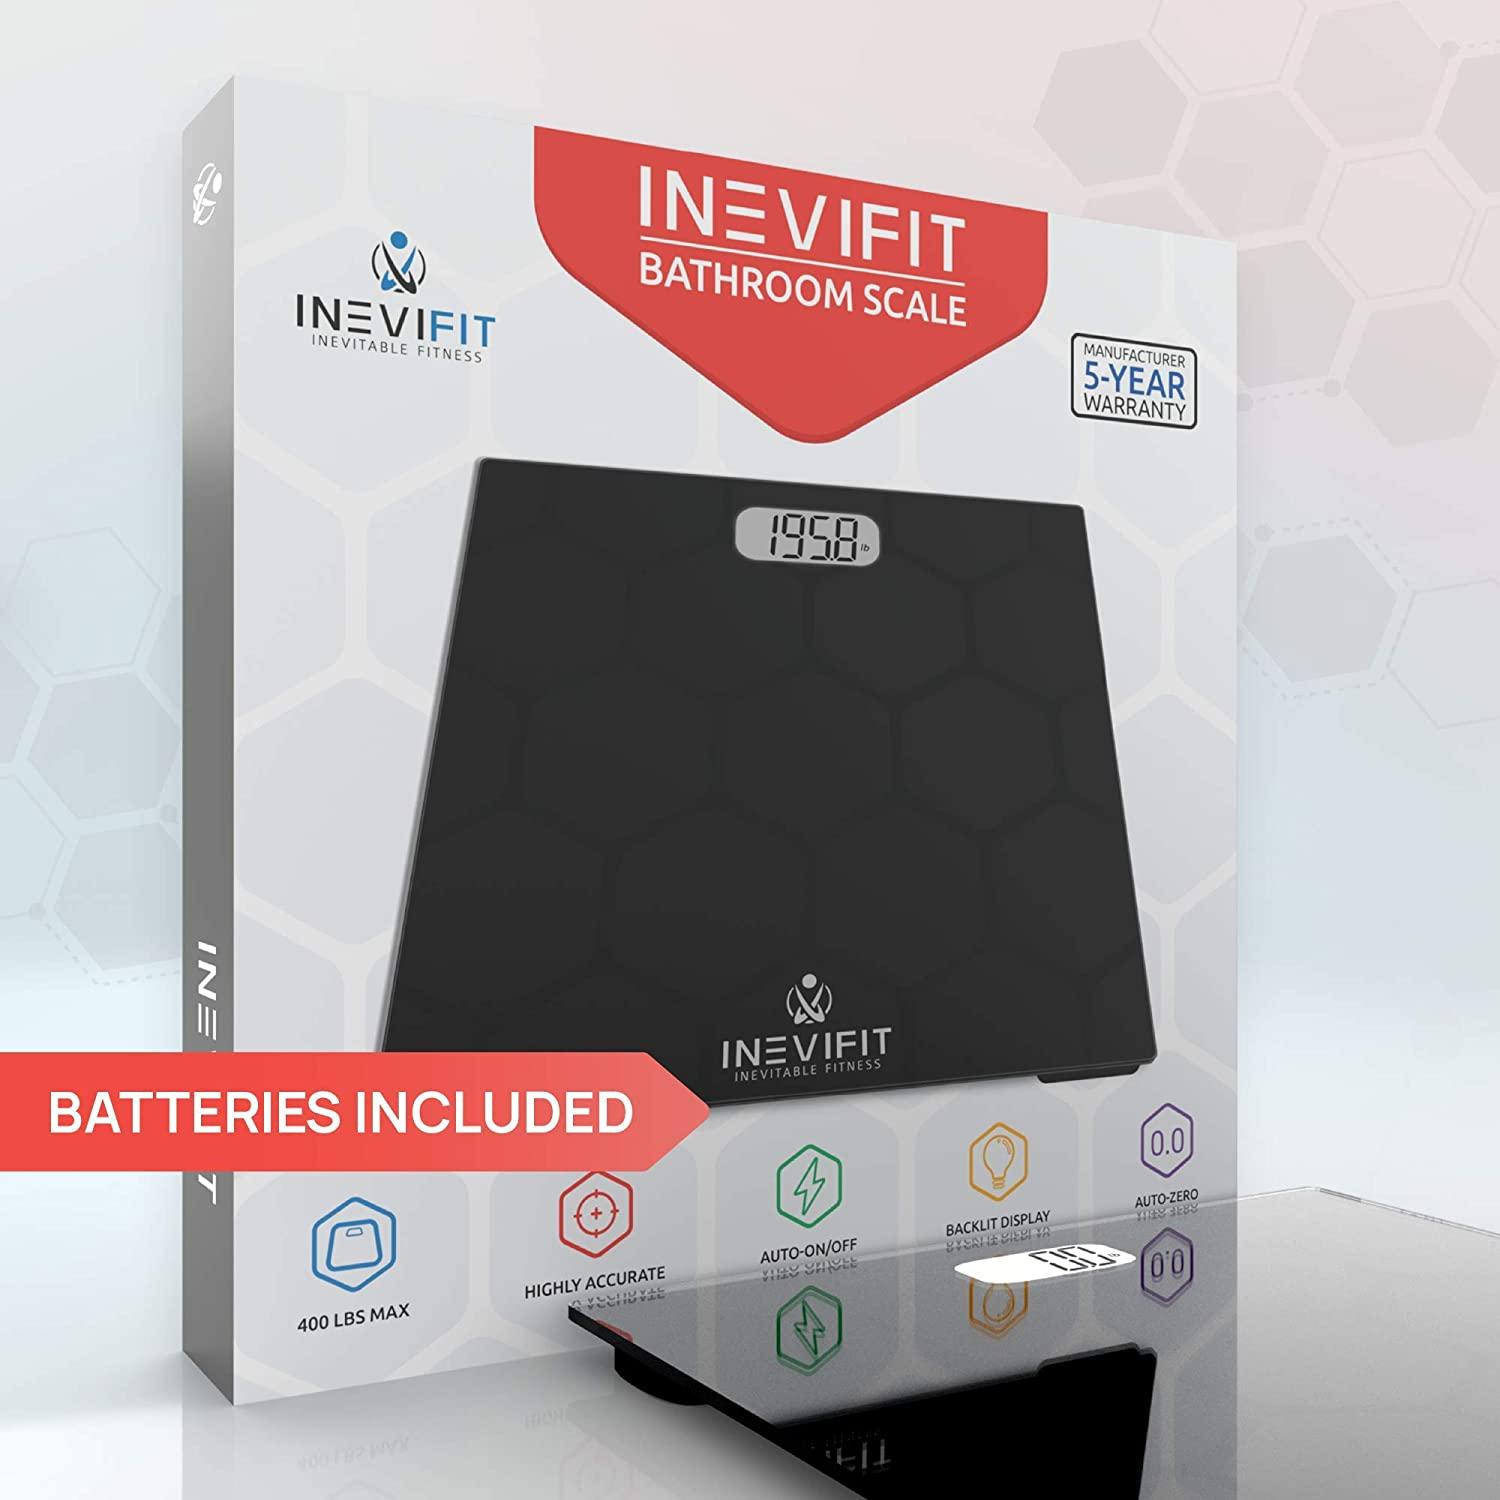 INEVIFIT Bathroom Scale, Highly Accurate Digital Bathroom Body Scale,  Measures Weight up to 400 lbs. Includes Batteries